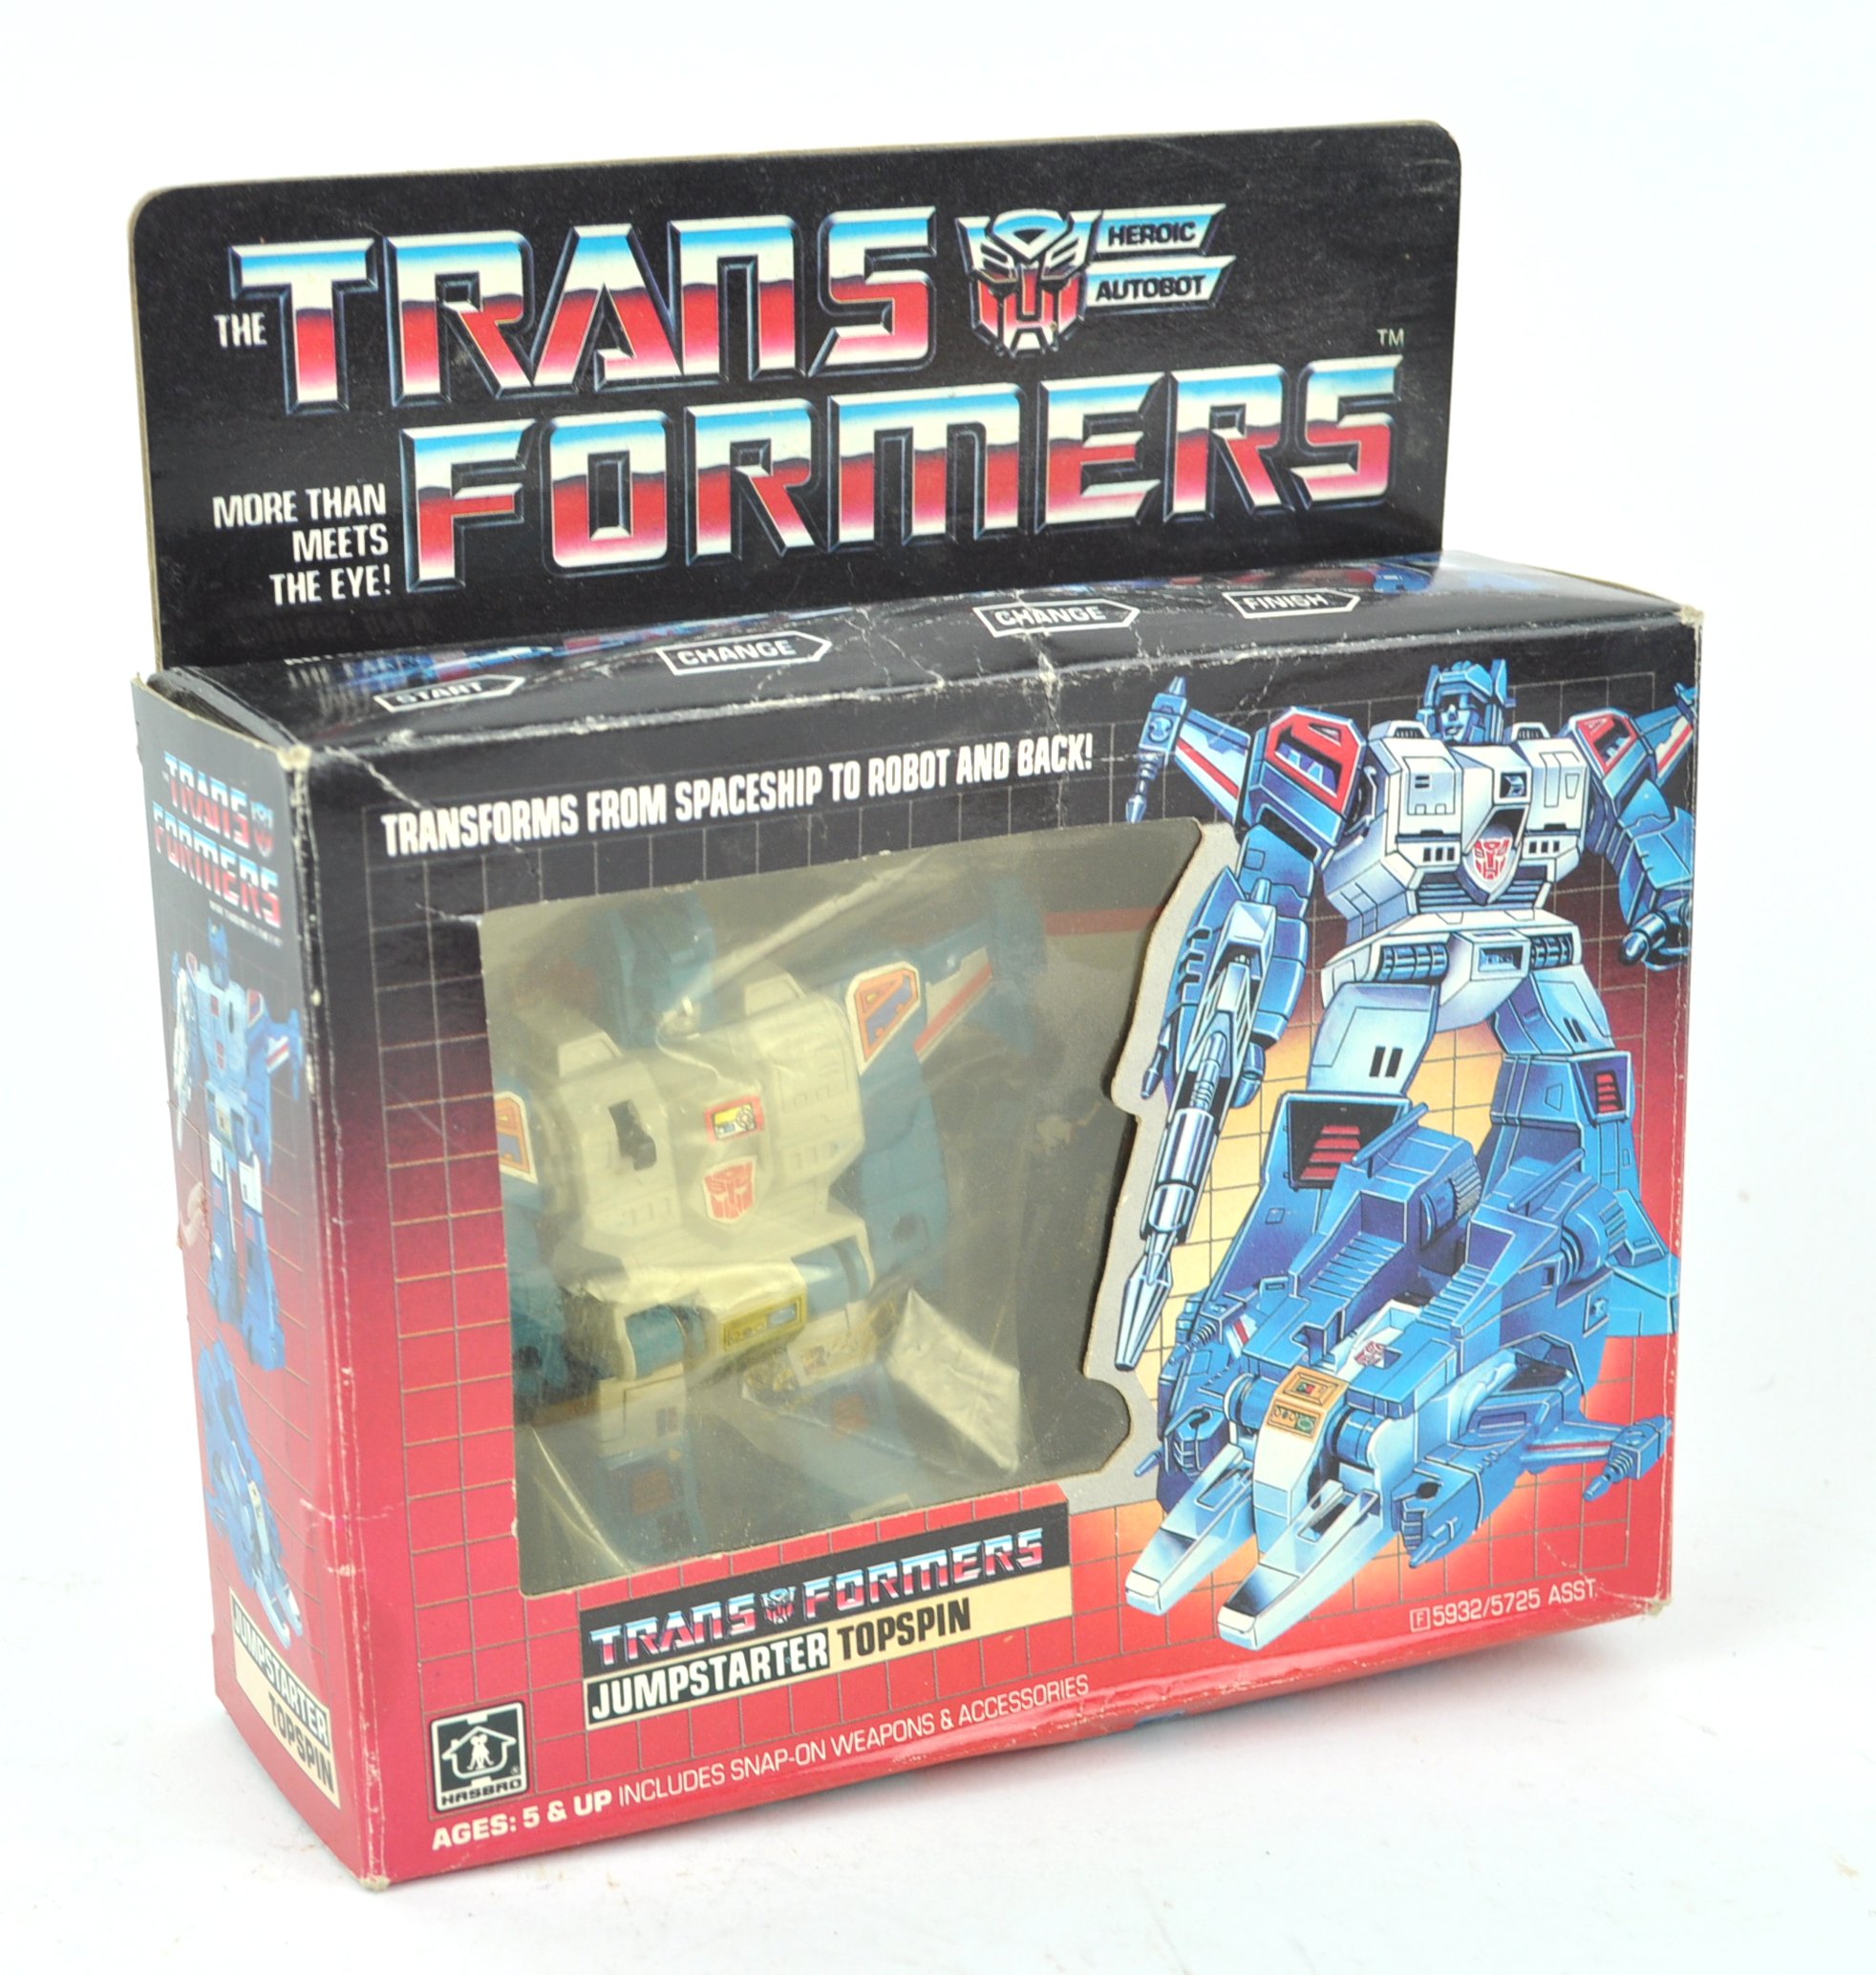 A boxed G1 transformers jump starter/top spin toy, numbered S932/5725 Asst,